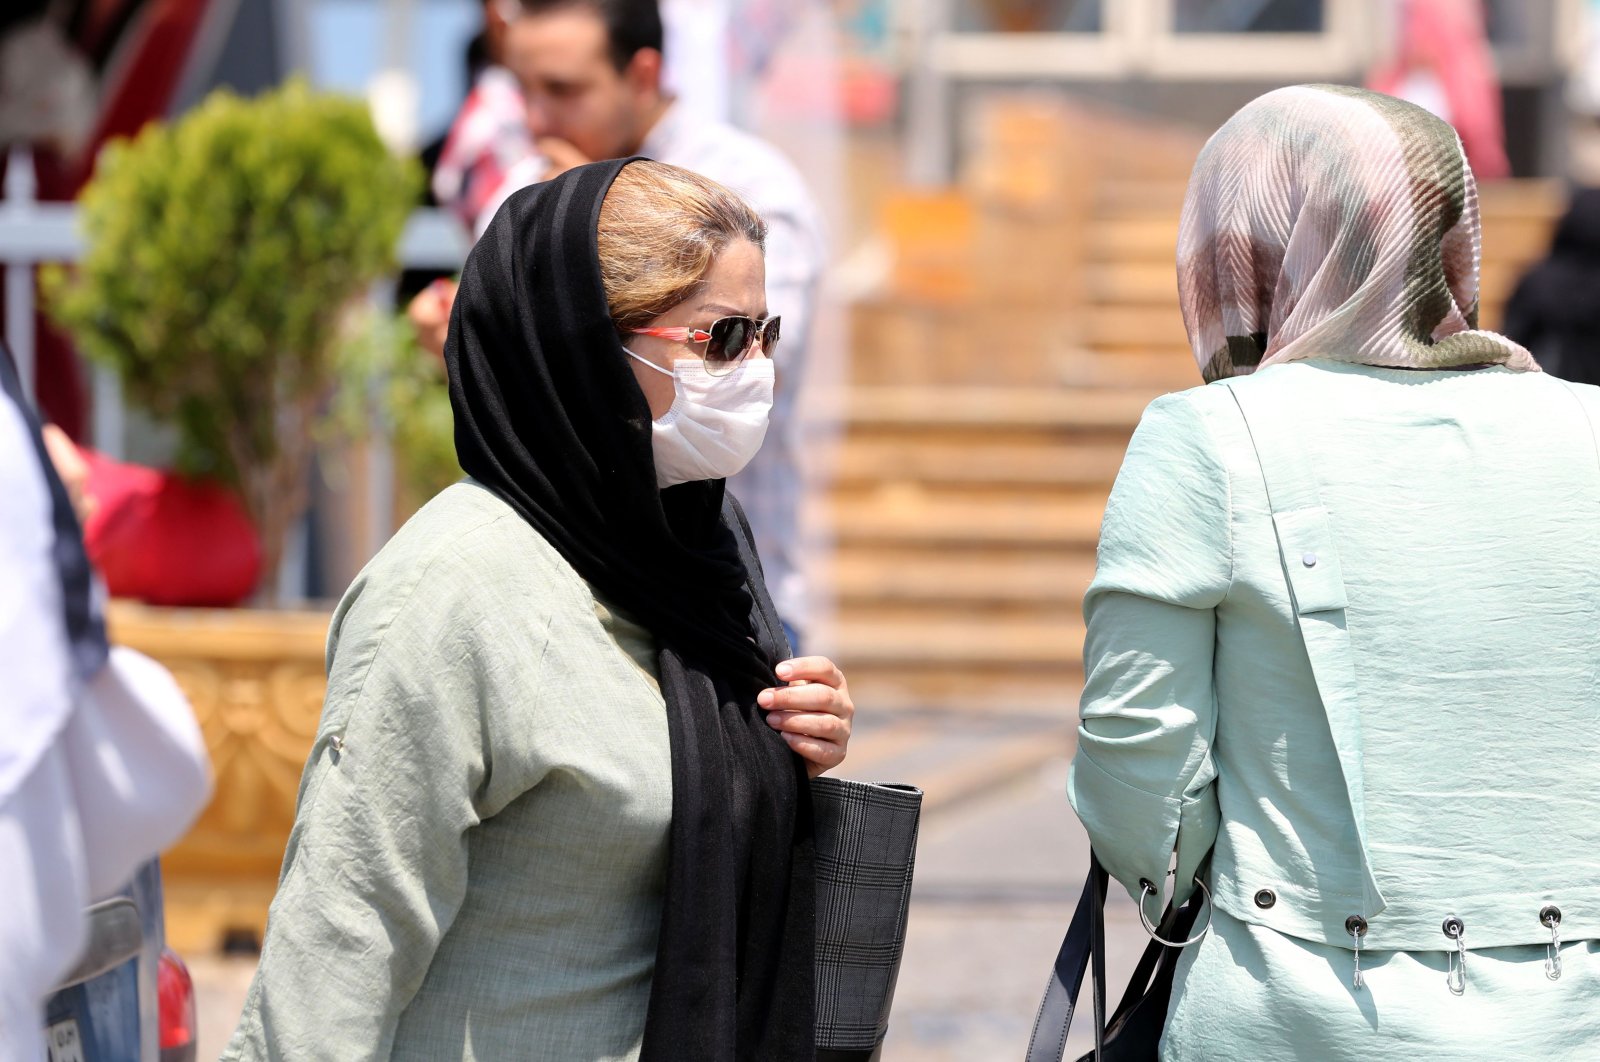 A pedestrian wearing a protective mask due to the coronavirus pandemic, walks along a street in the Iranian capital Tehran, June 28, 2020. (AFP Photo)